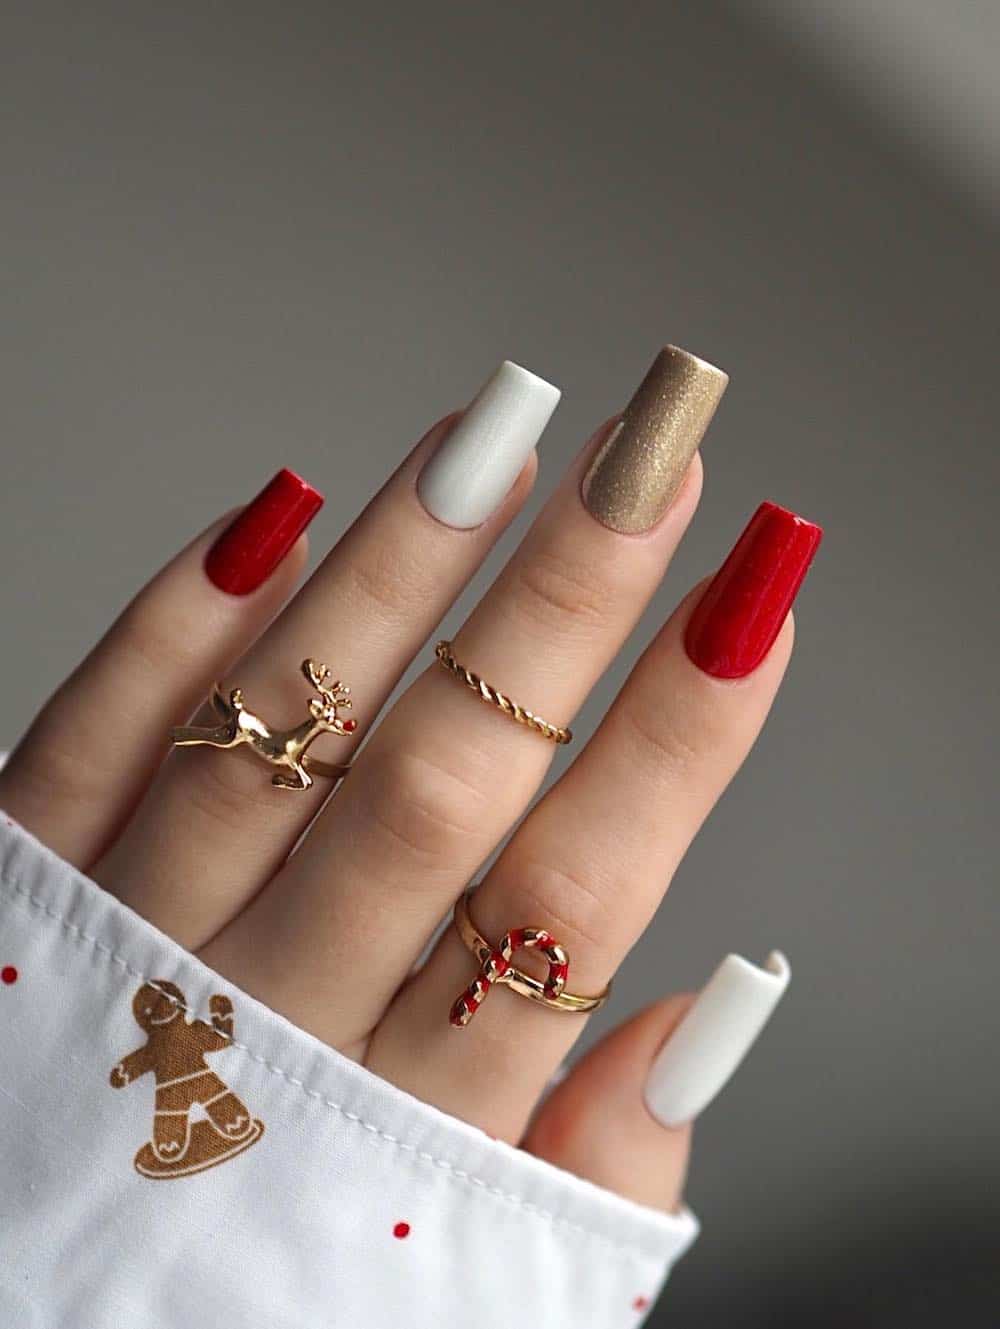 Classic, red, white and gold manicure.